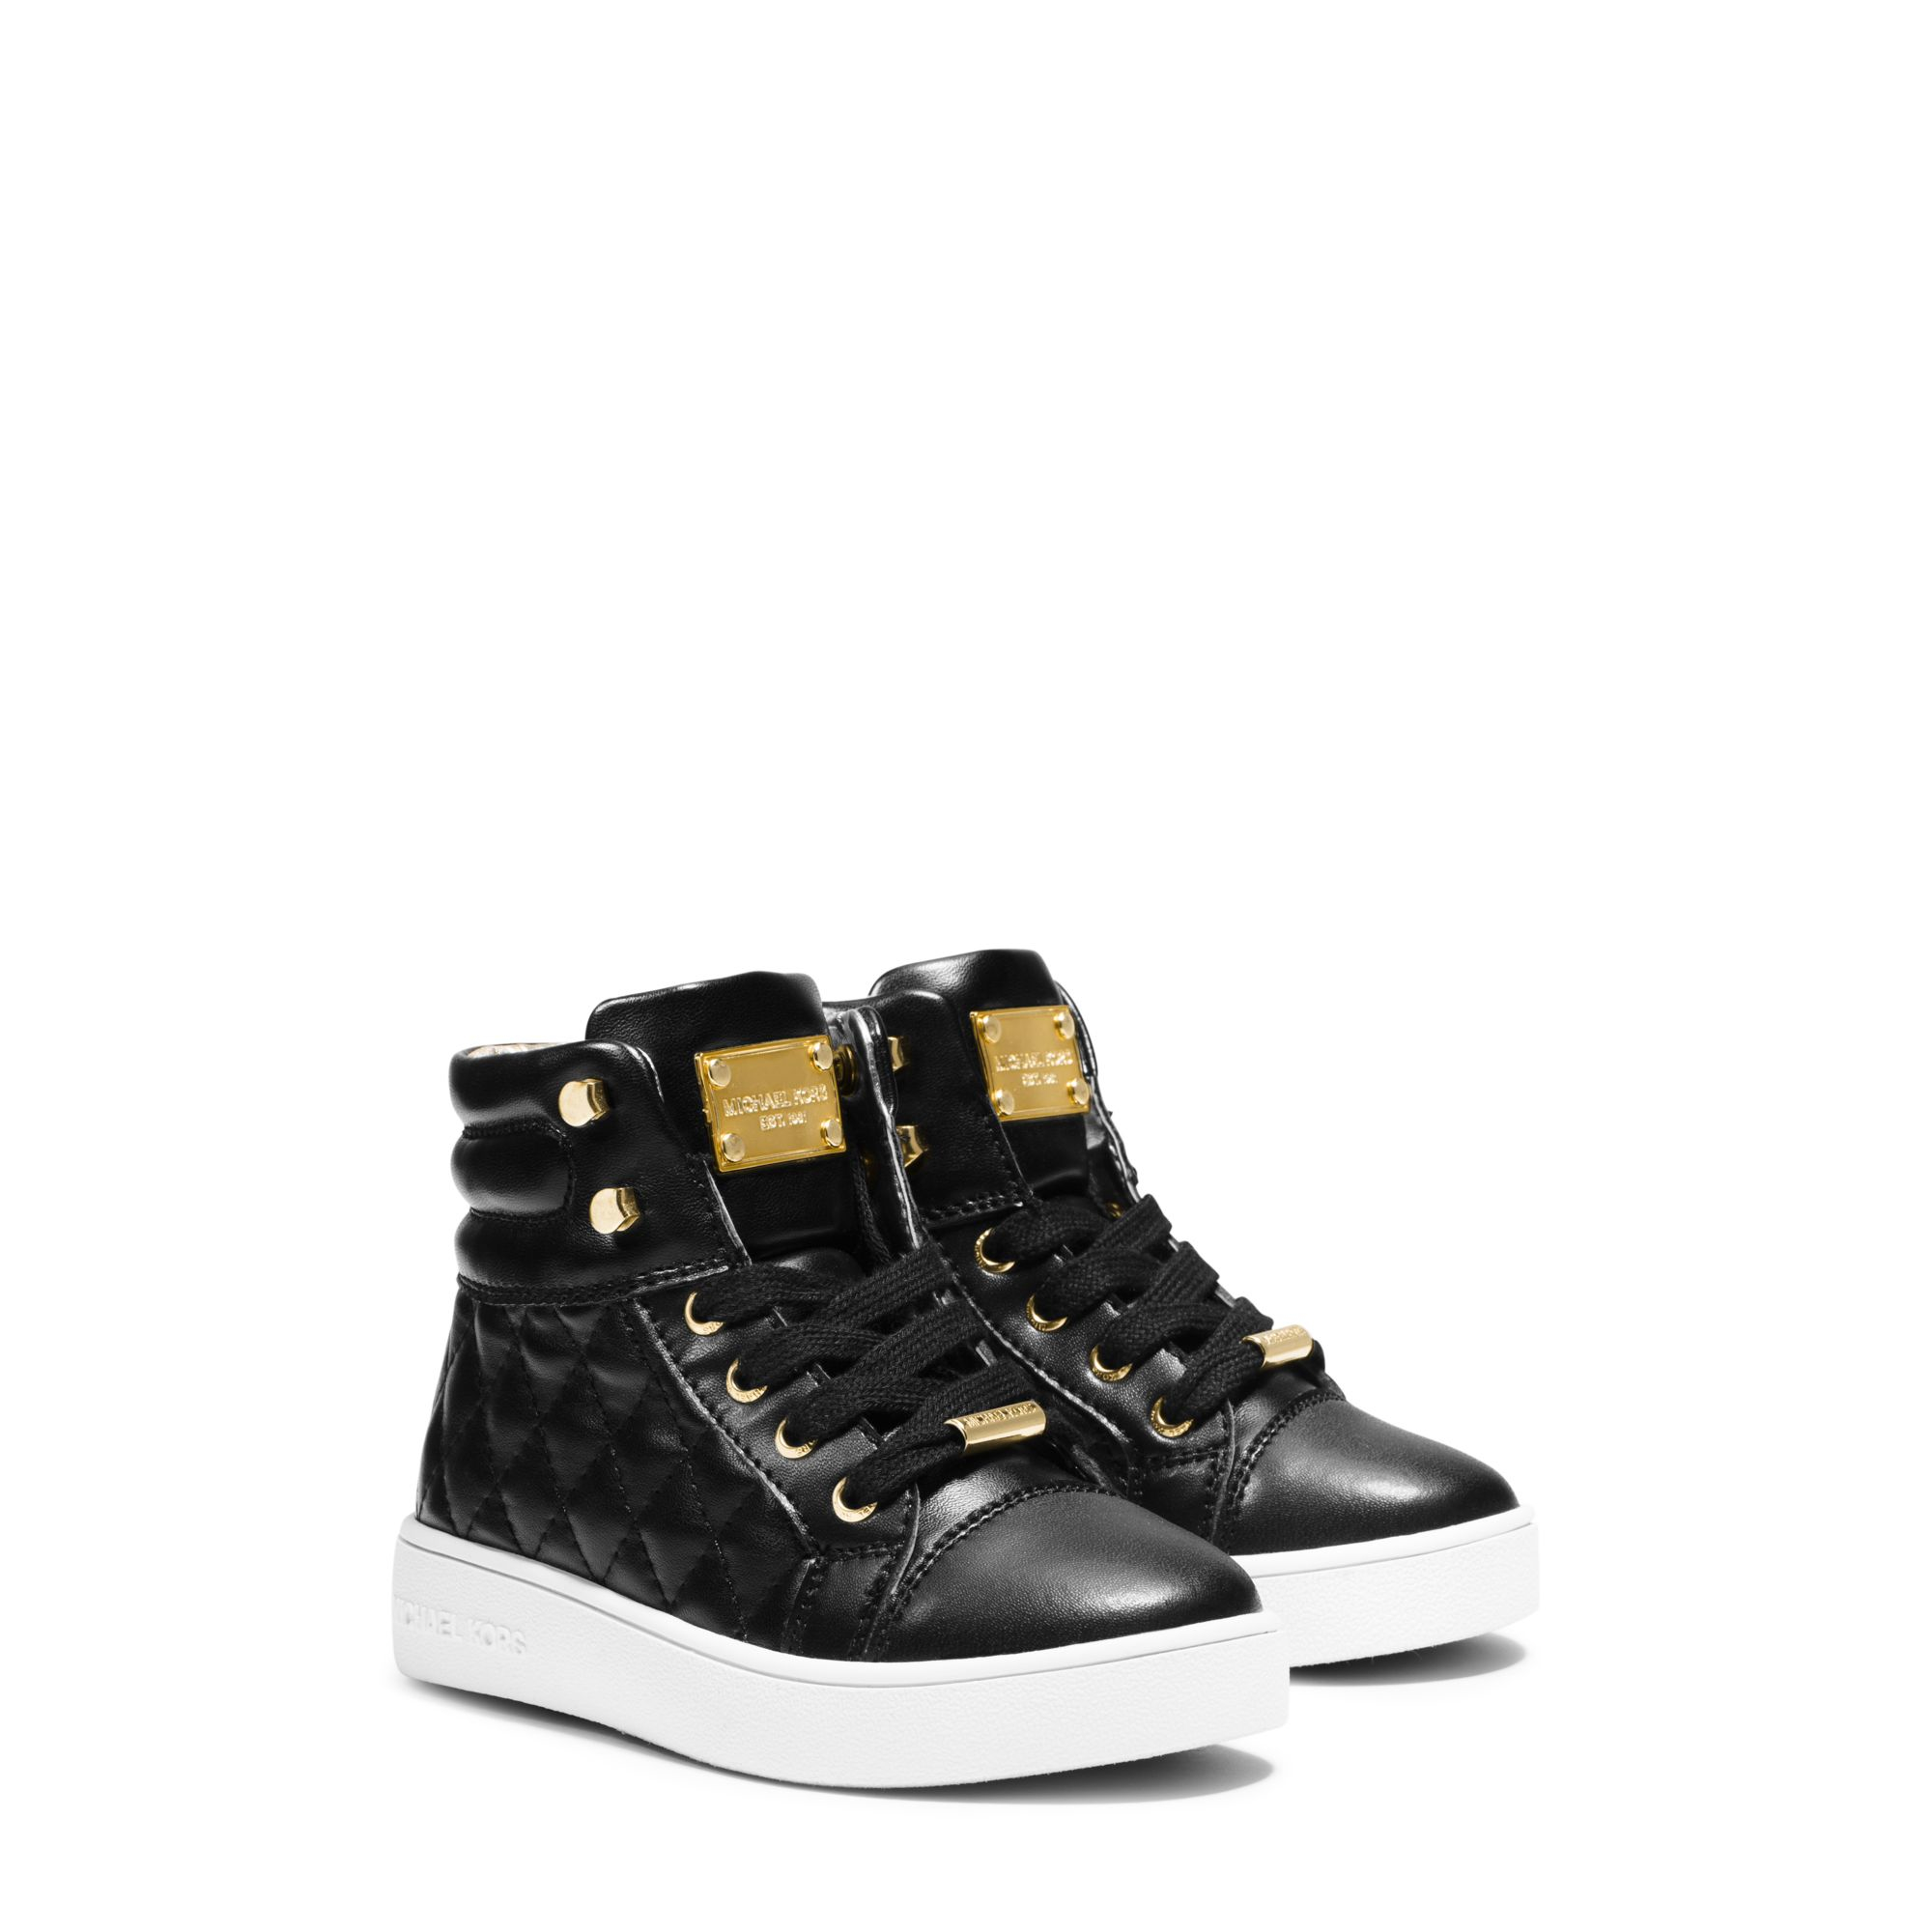 Lyst - Michael Kors Girl’s Ivy Quilted High-top Sneaker, Toddler in Black